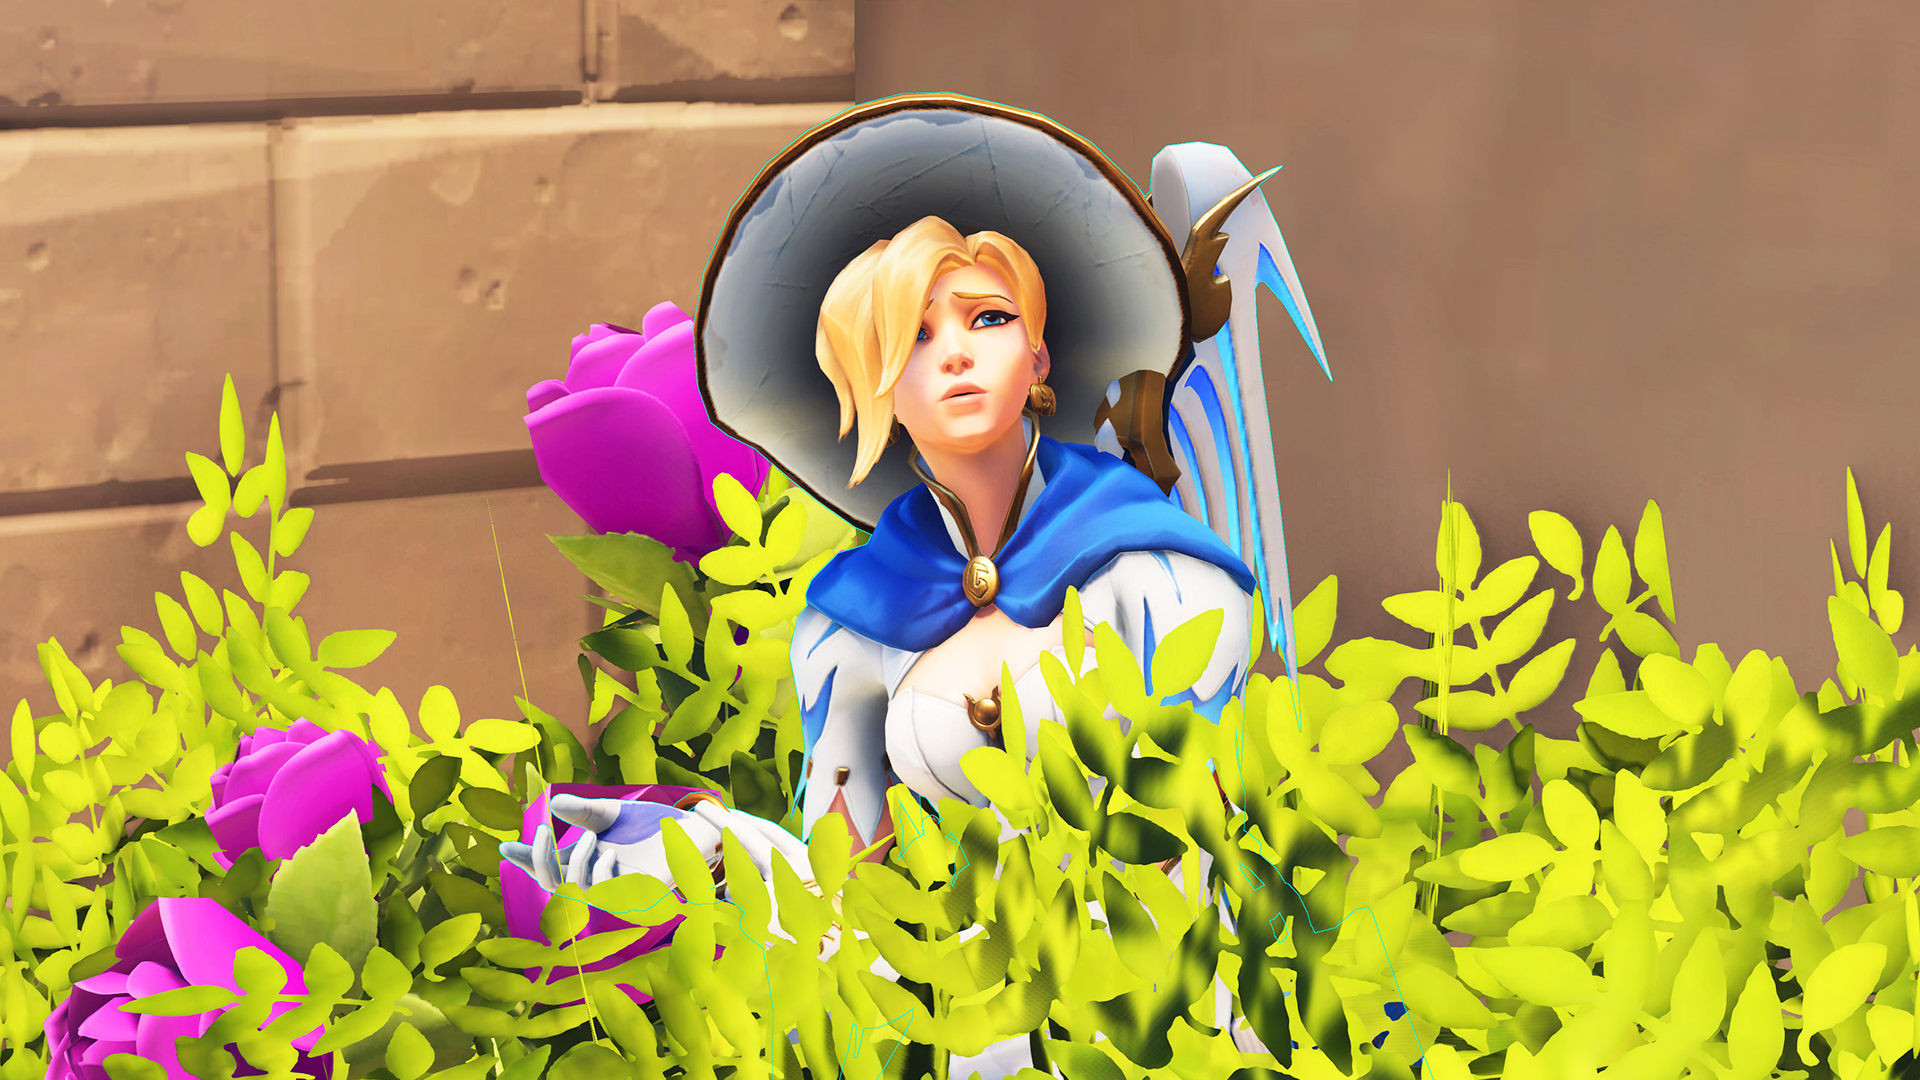 Hall-of-famer Mercy player wins competitive Overwatch 2 match by lying in a bush